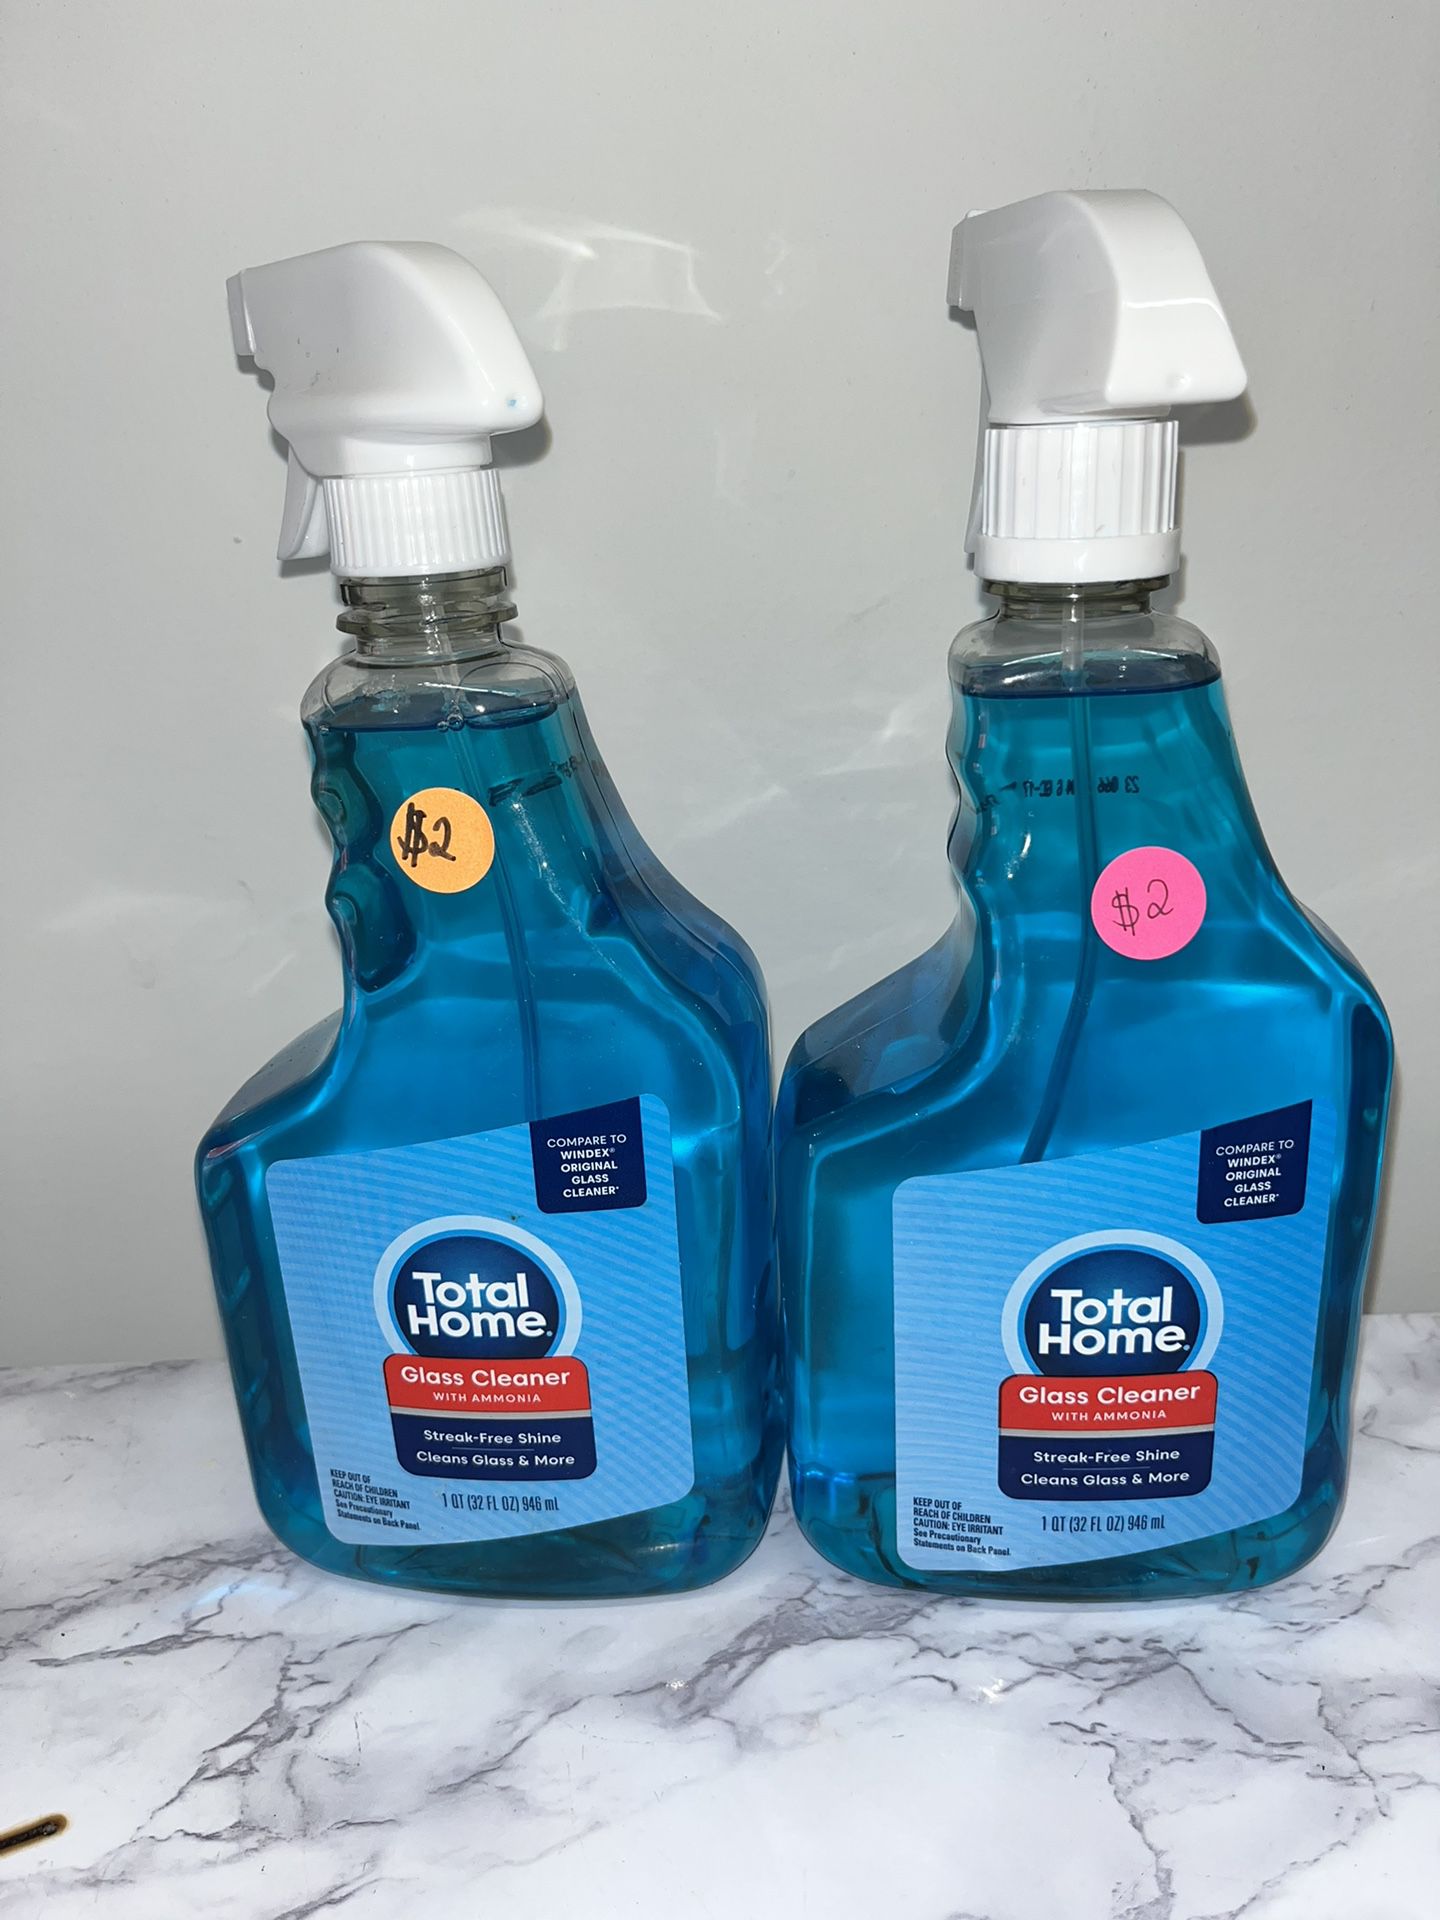 Household/ Cleaning Supplies Bundles for Sale in West Hollywood